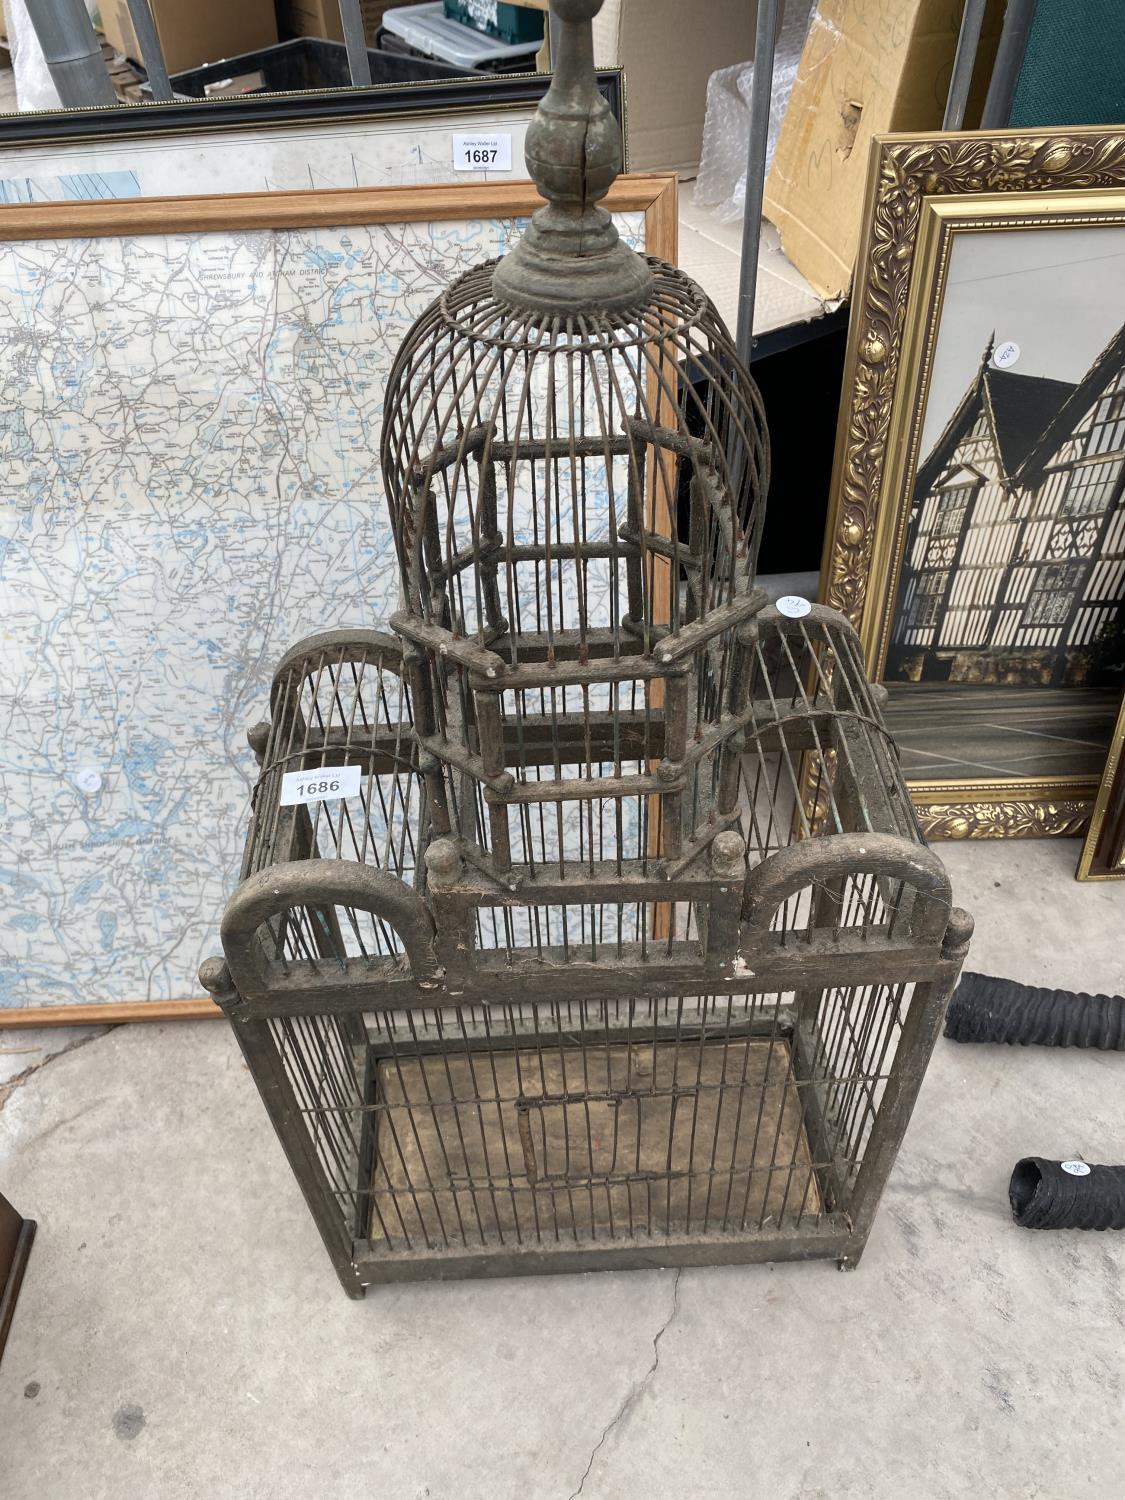 A VINTAGE AND DECORATIVE BIRD CAGE